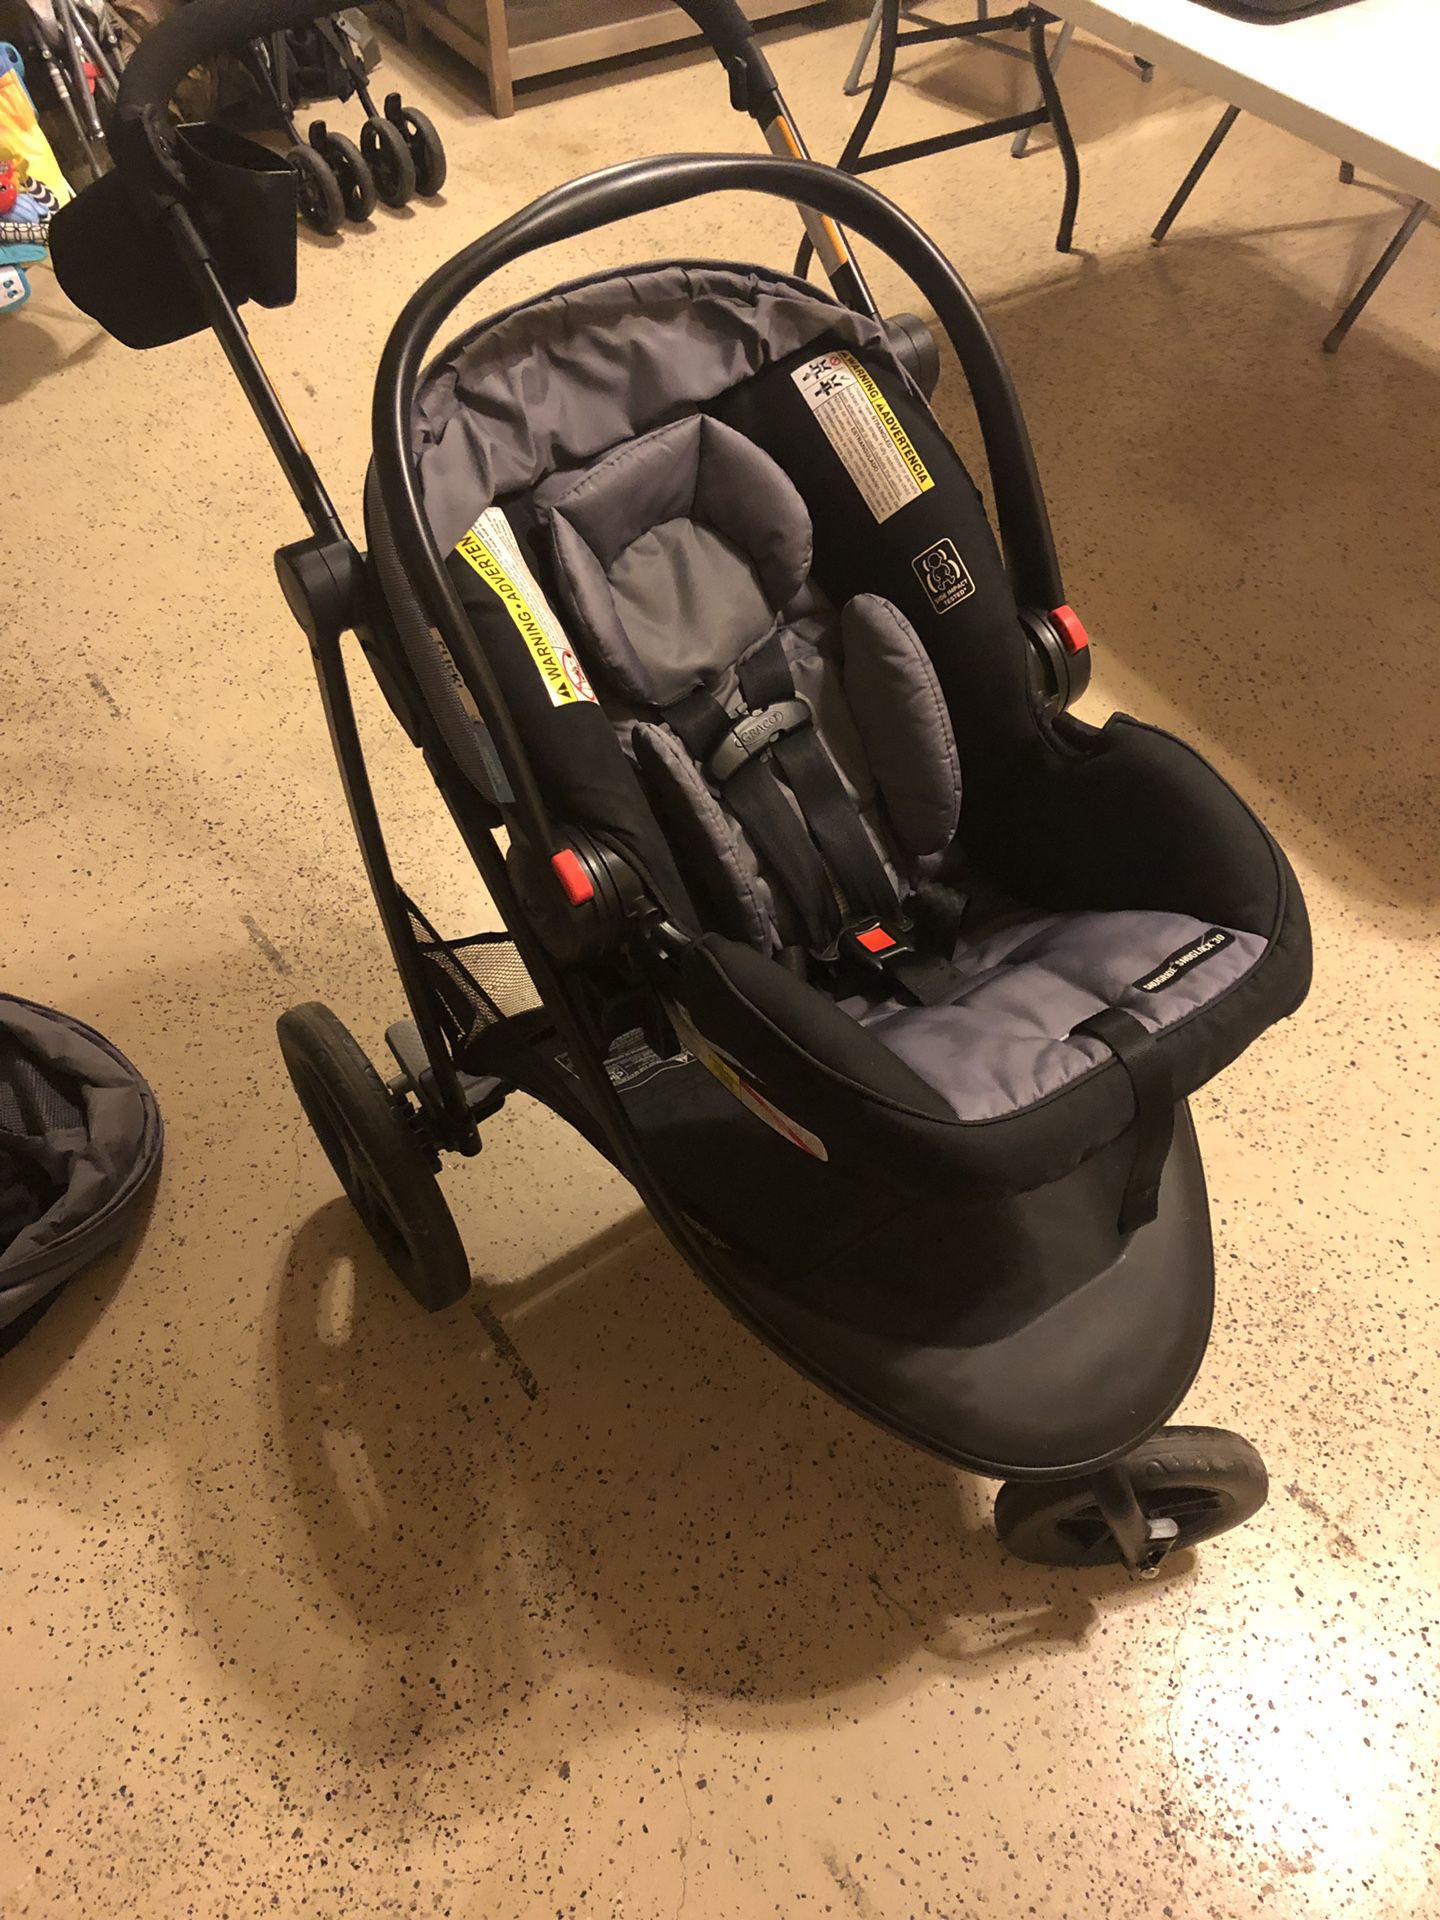 Graco stroller and car seat.